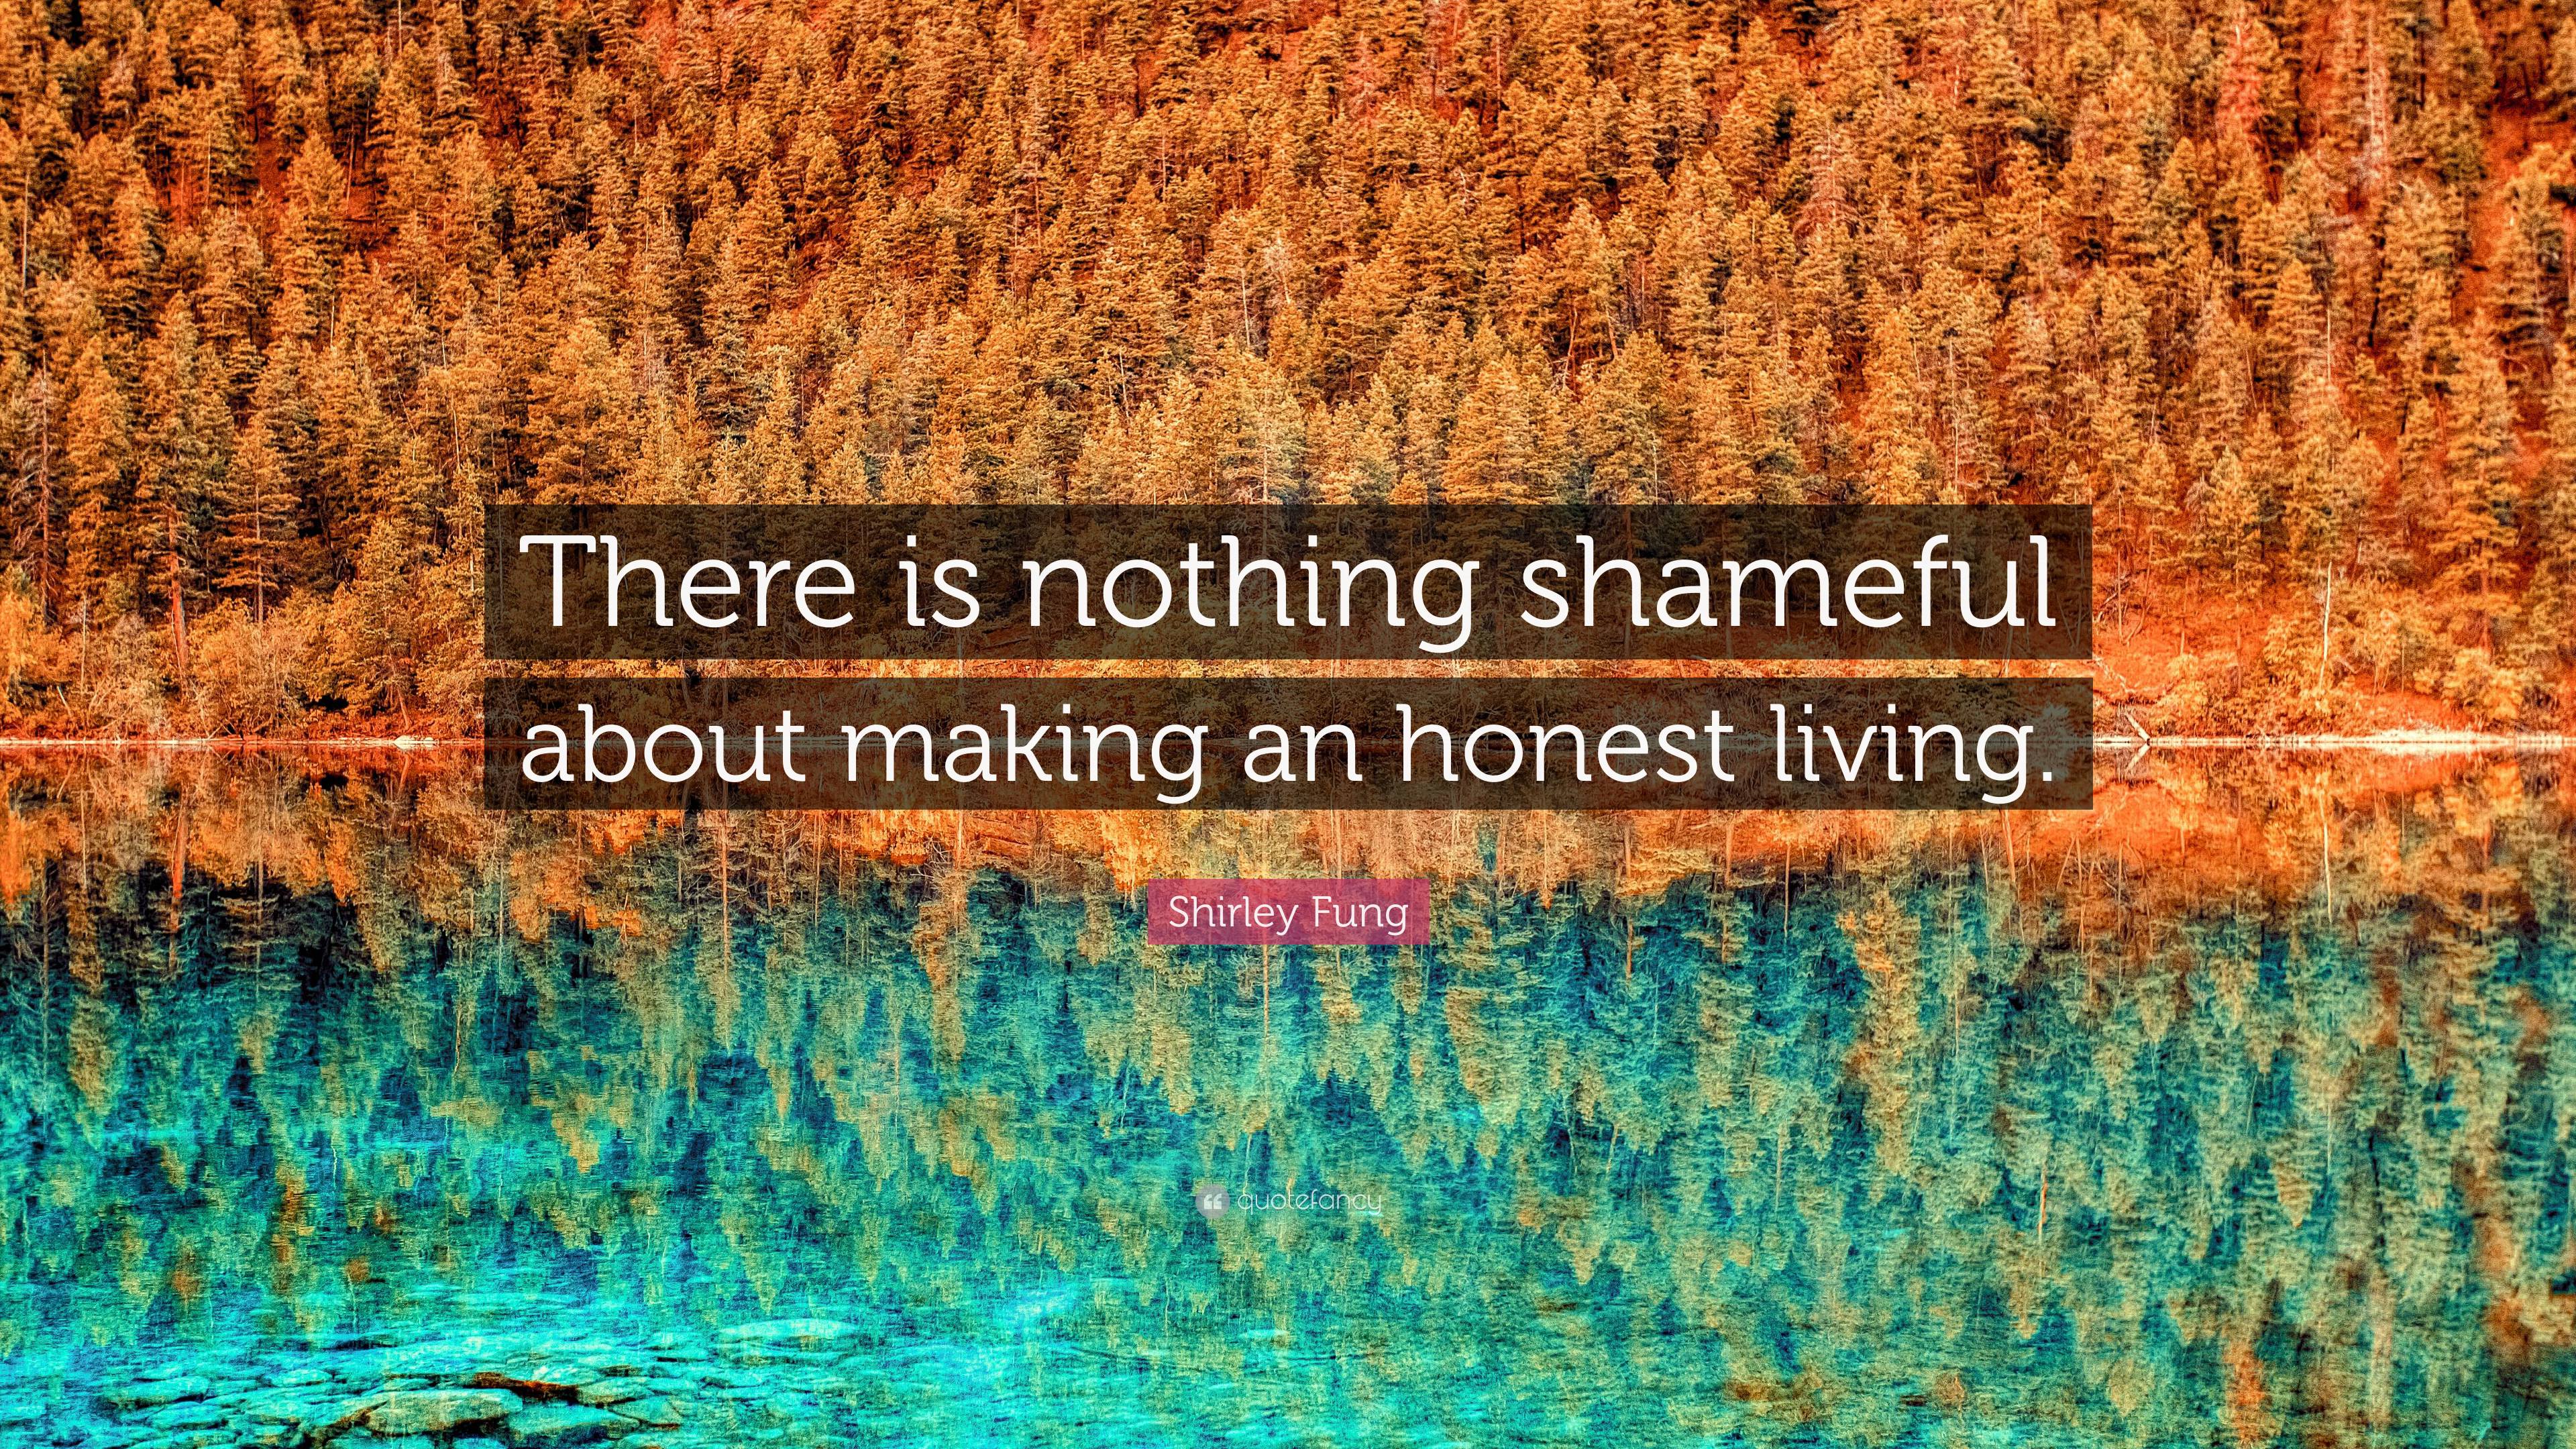 Shirley Fung Quote: “There is nothing shameful about making an